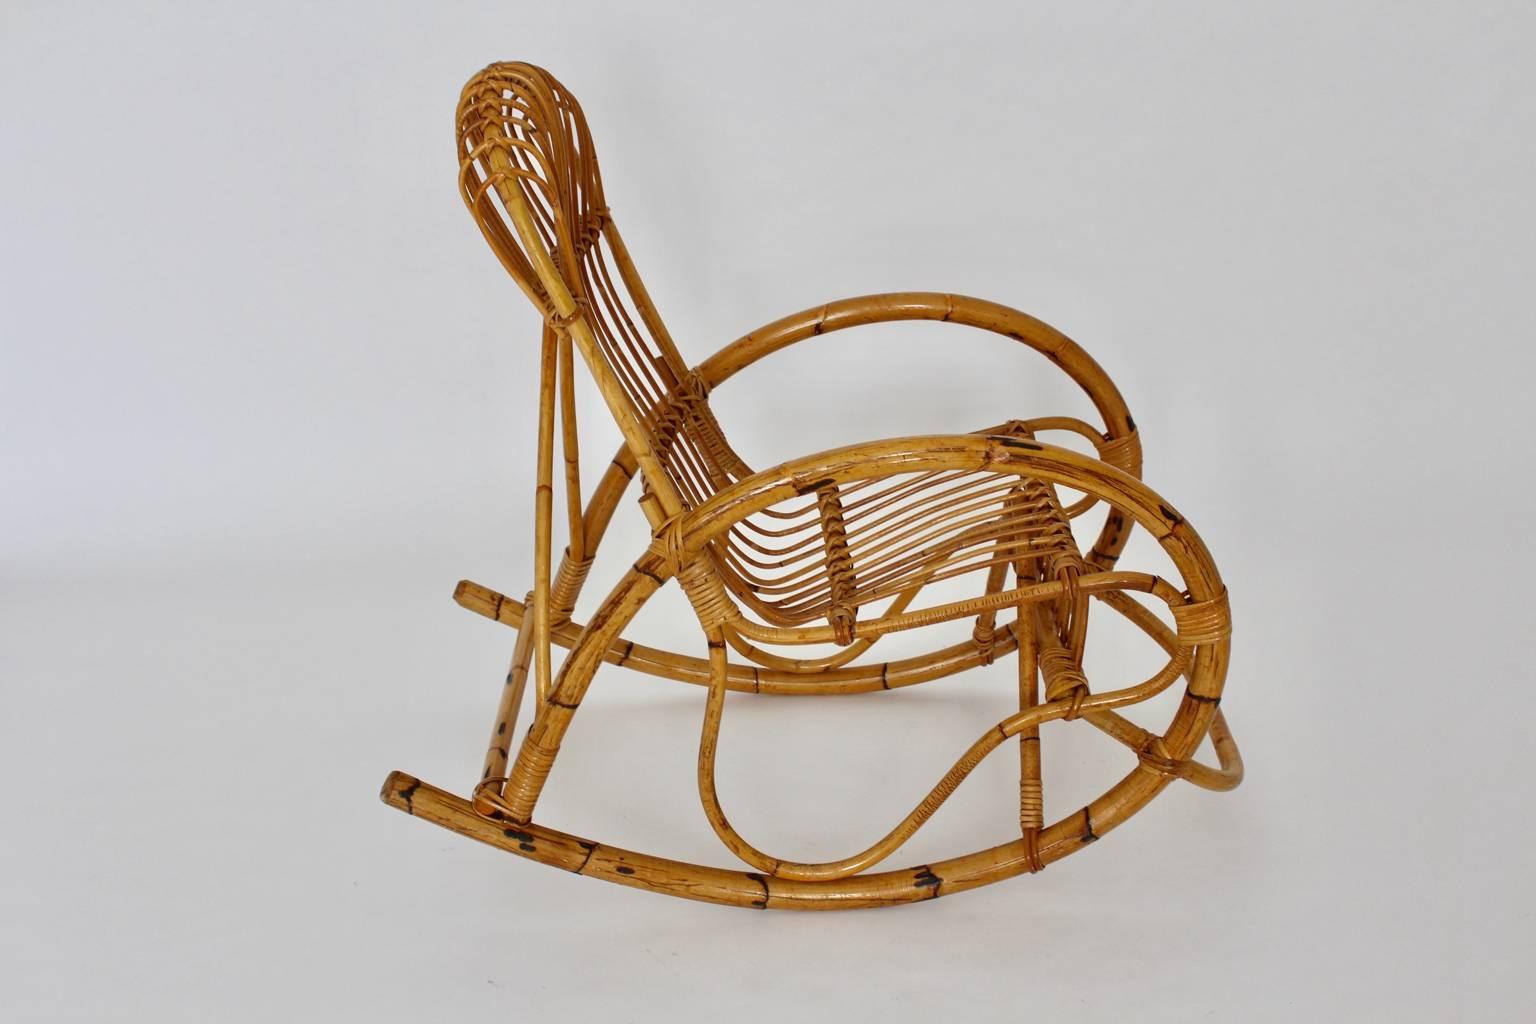 Riviera style vintage organic rocking chair from rattan bamboo Italy 1960s.
While the sculptural rocking chair shows a great shape with oval like curved armrests, which flow into the bamboo stem wheel, the seat shell and the backrest features curved